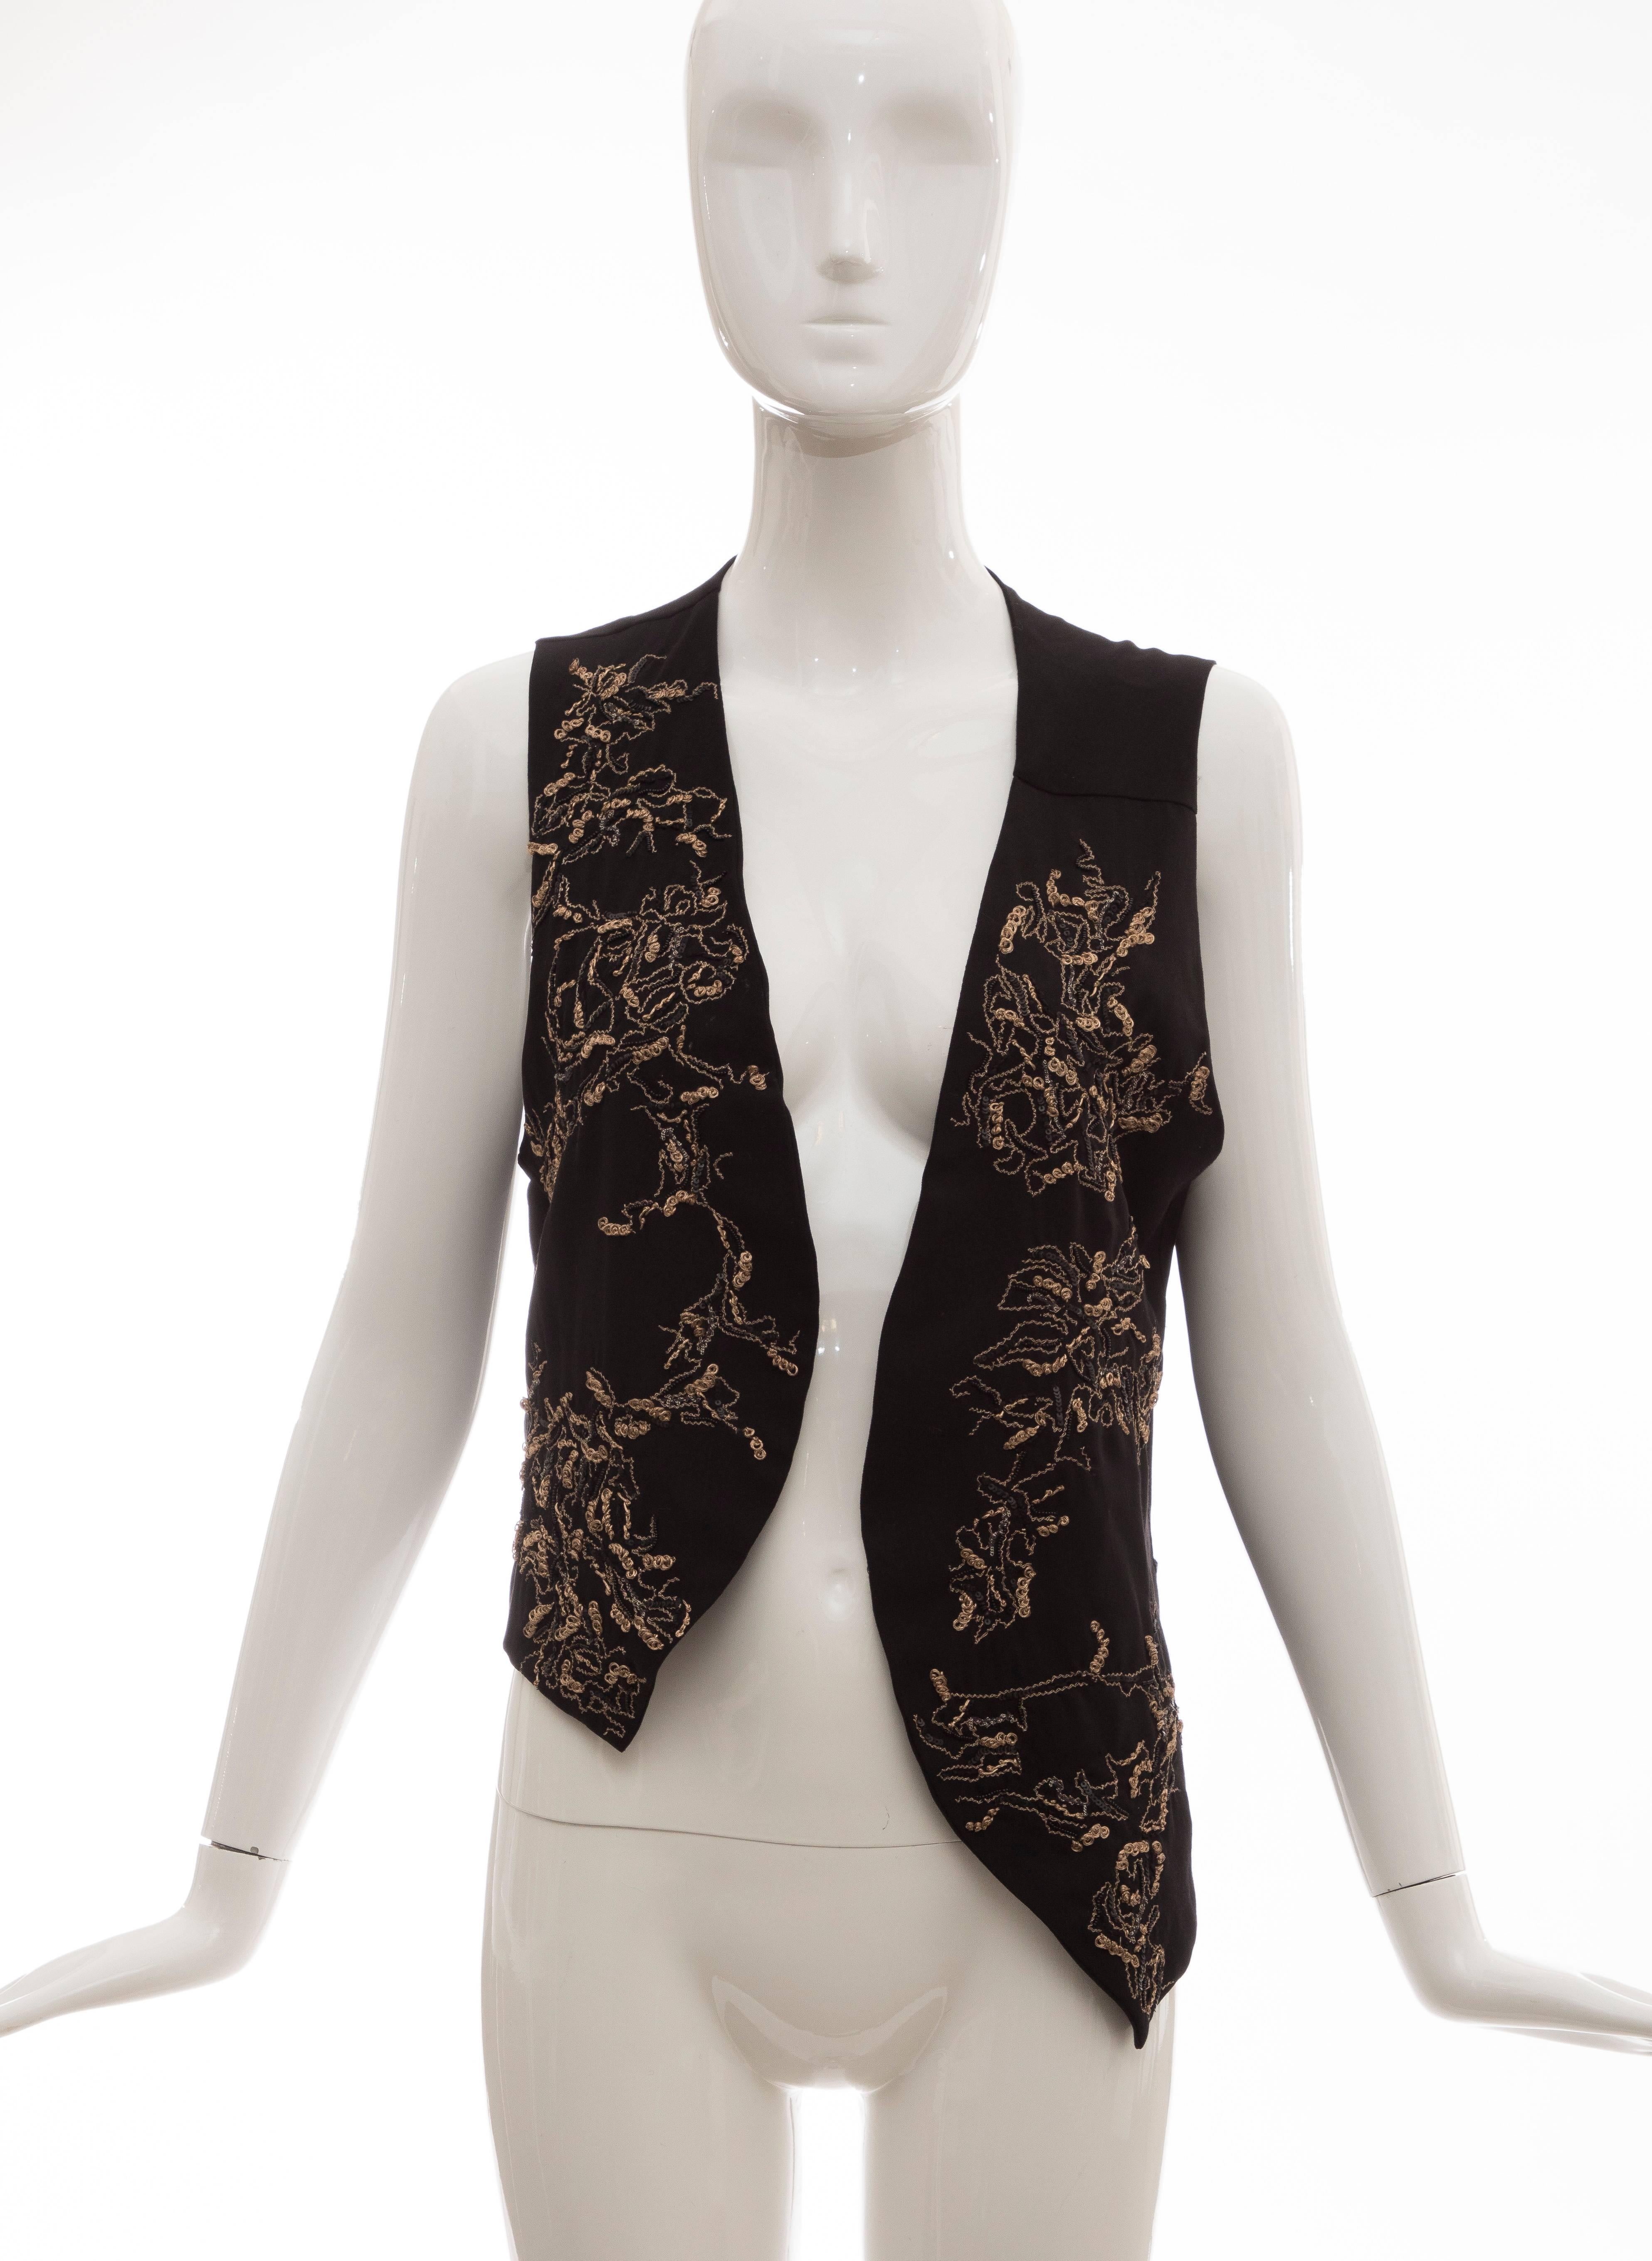 Ann Demeulemeester black embroidered assymetrical wool vest.

No Size Label

Bust 36, Waist 35, Length 24 